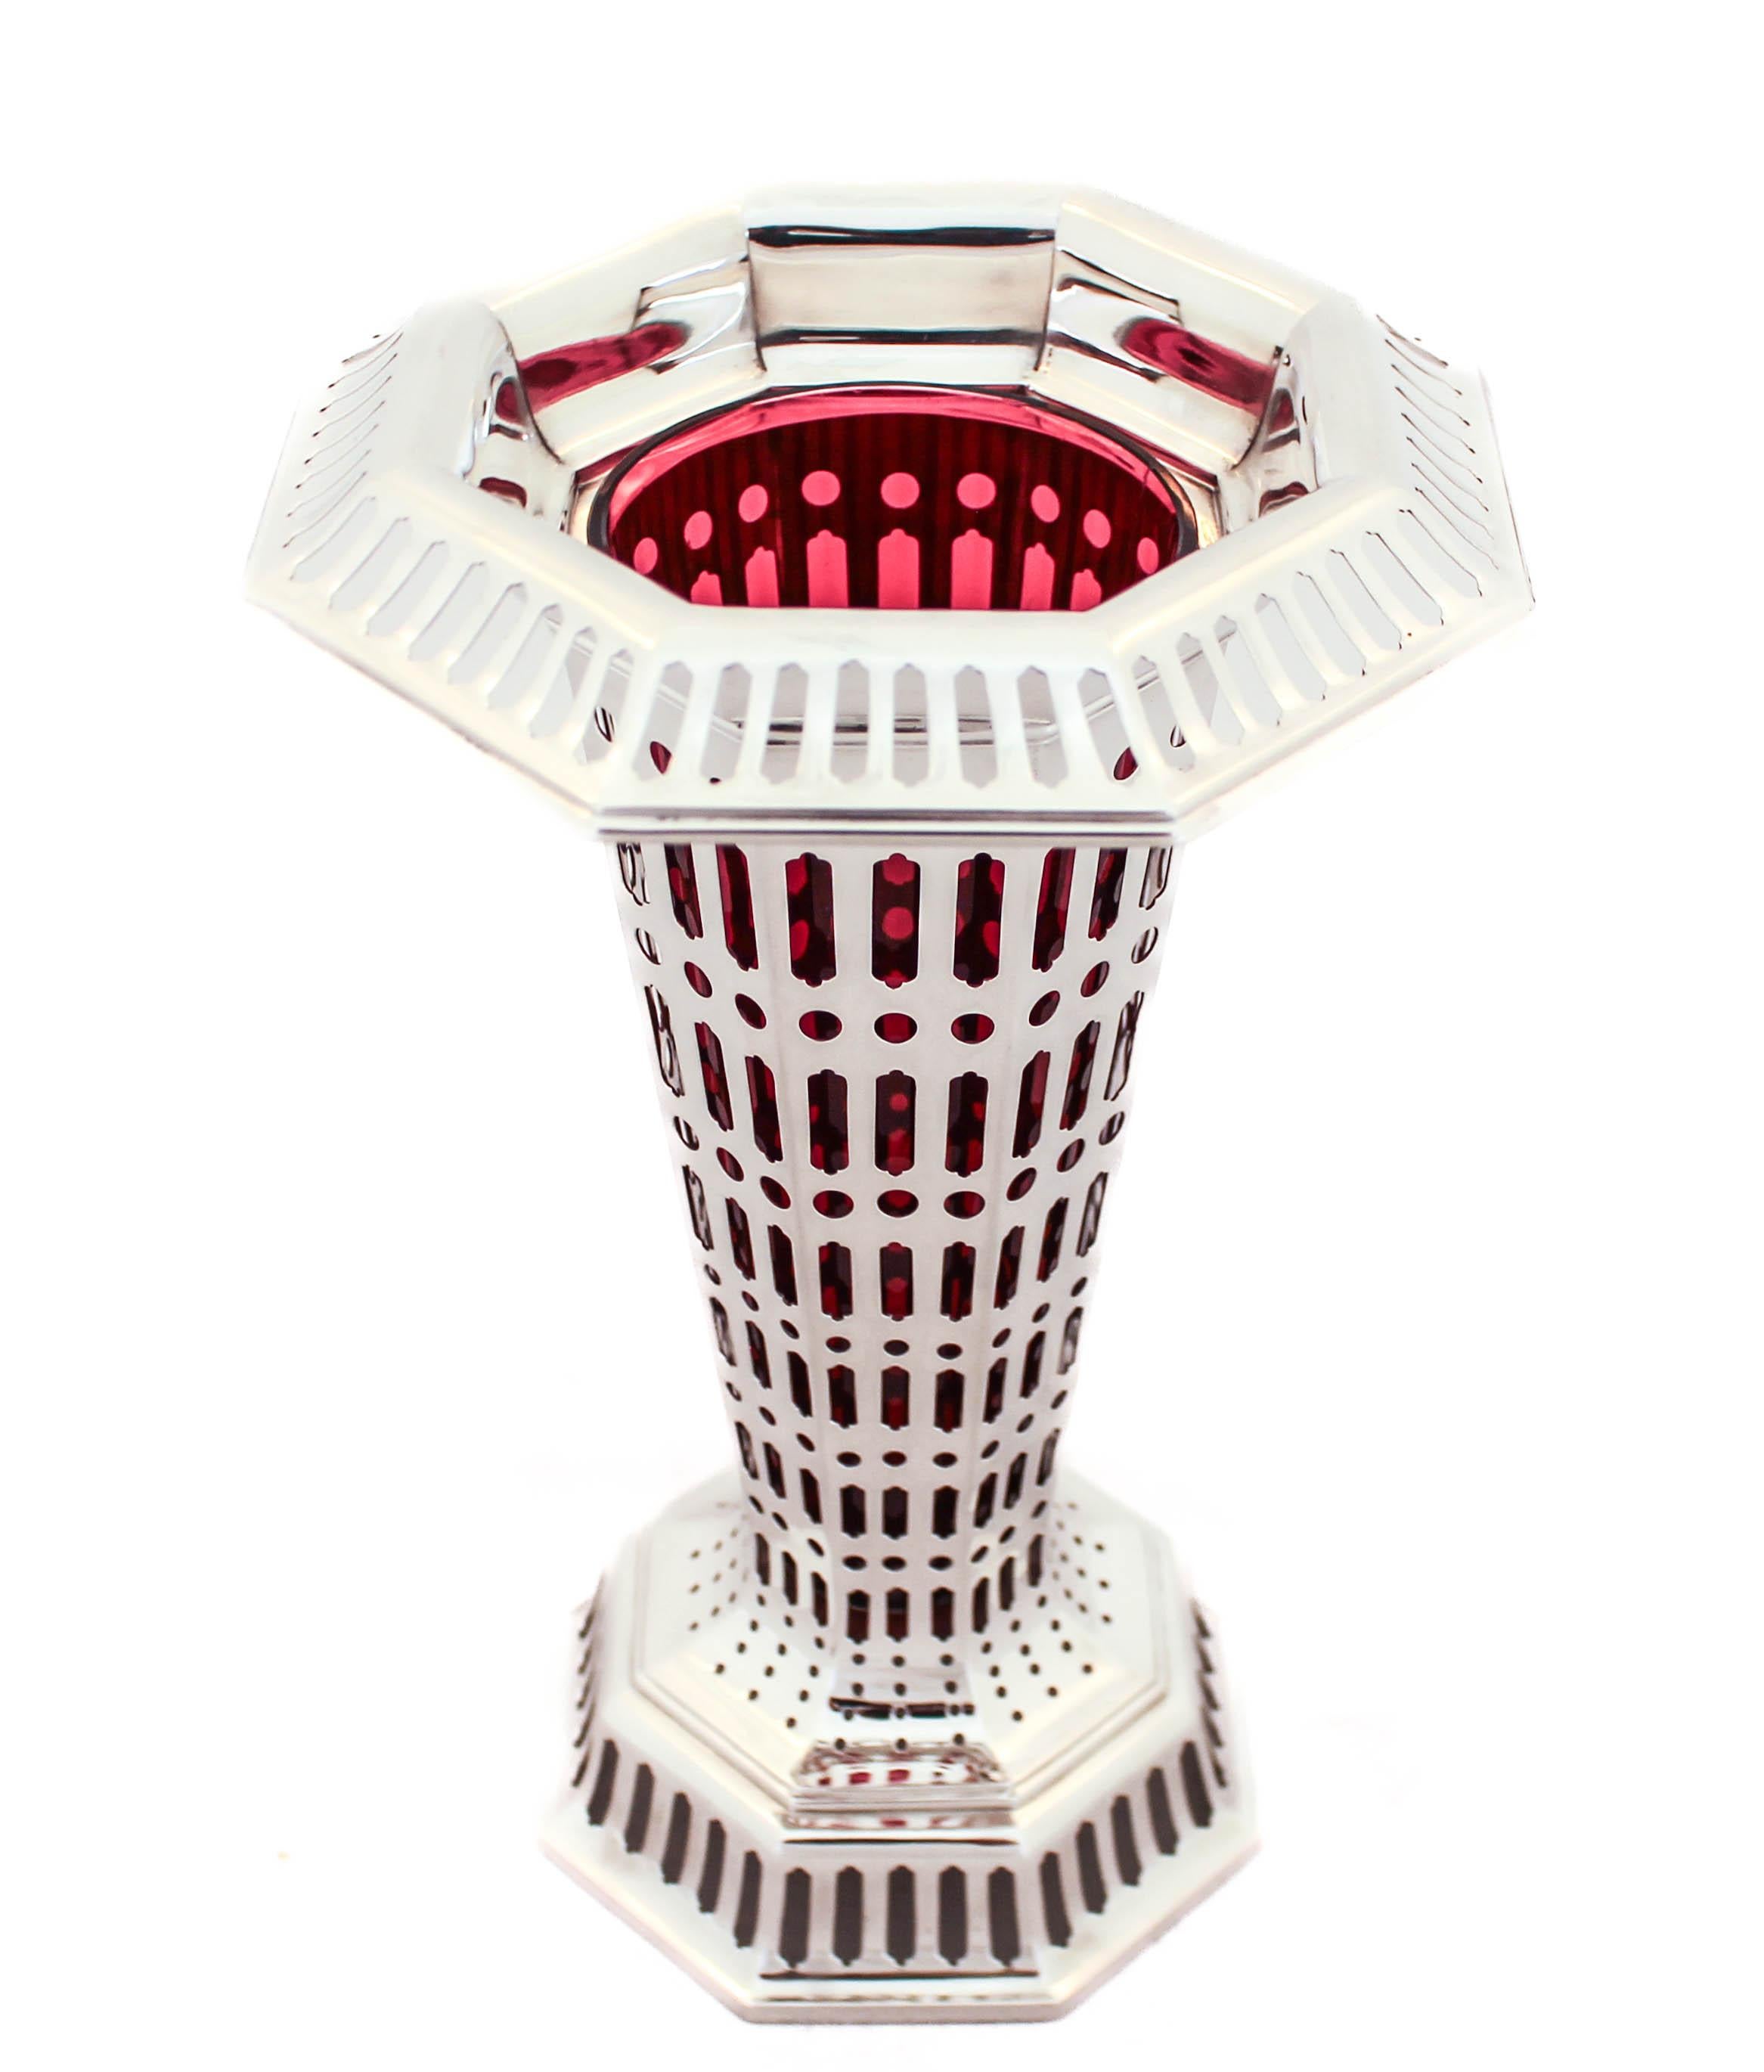 Being offered is a sterling silver vase by the world renowned Tiffany and Company.  It has a reticulated design with a ruby-red glass liner.  The glass insert is removable so it’s easy to wash and replace.  The cutout design is geometric and allows